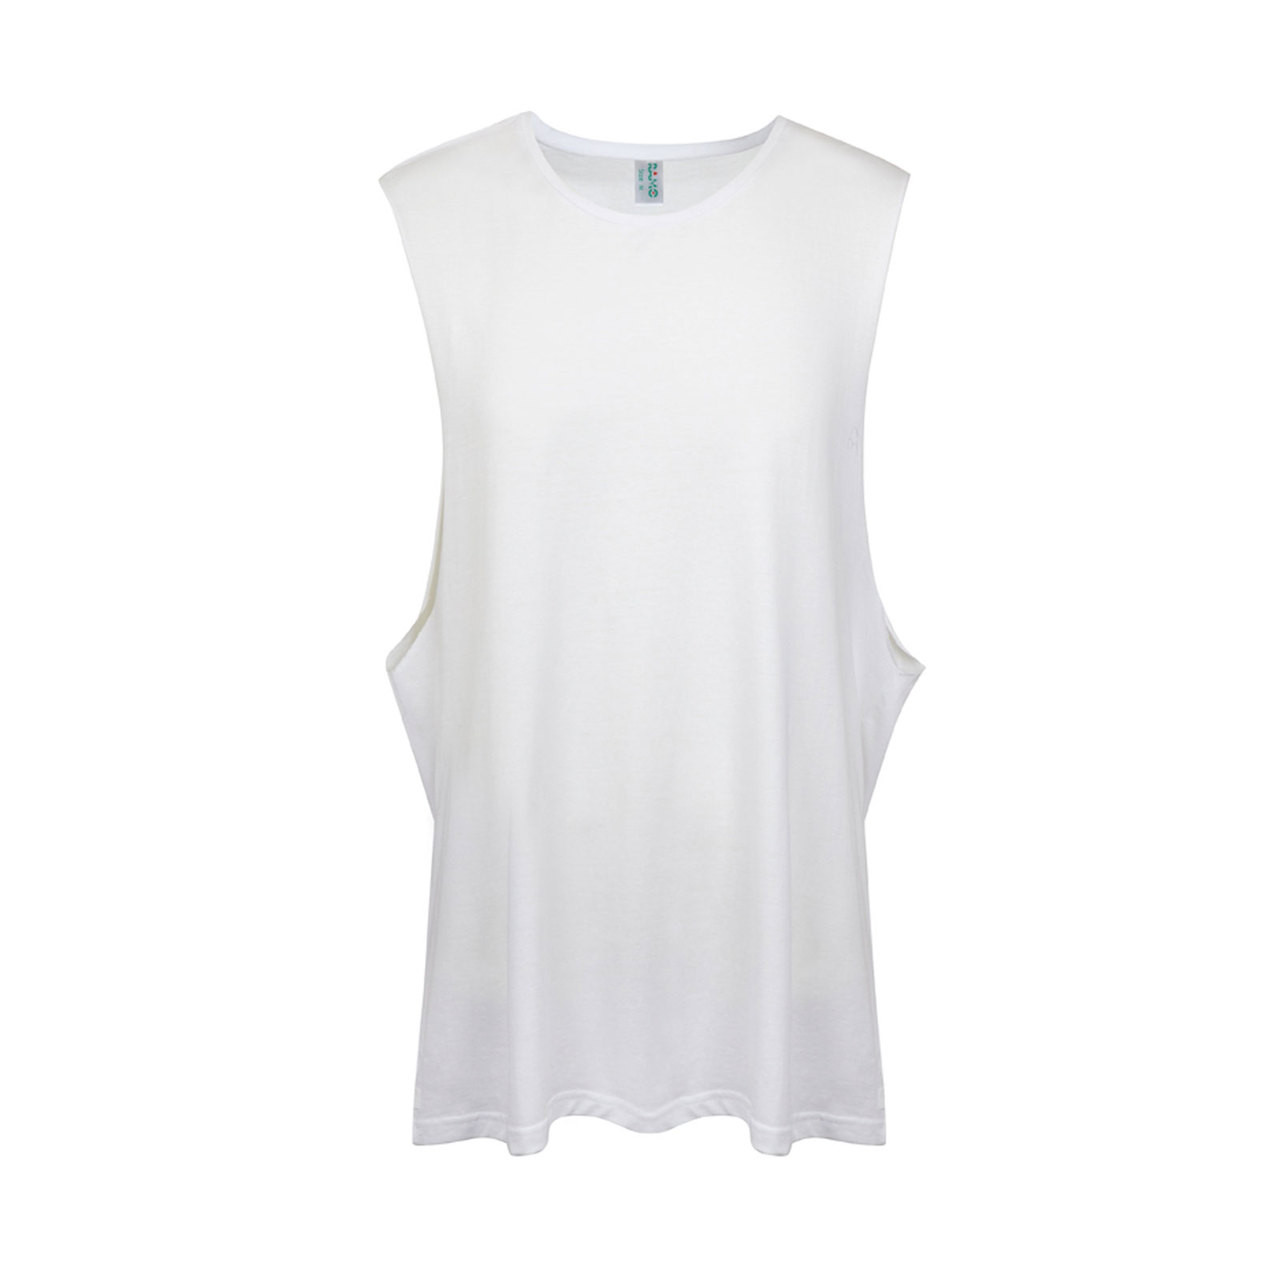 Muscle Tee Tank with Low Cut Sides | wholesale sports blank singlets ...